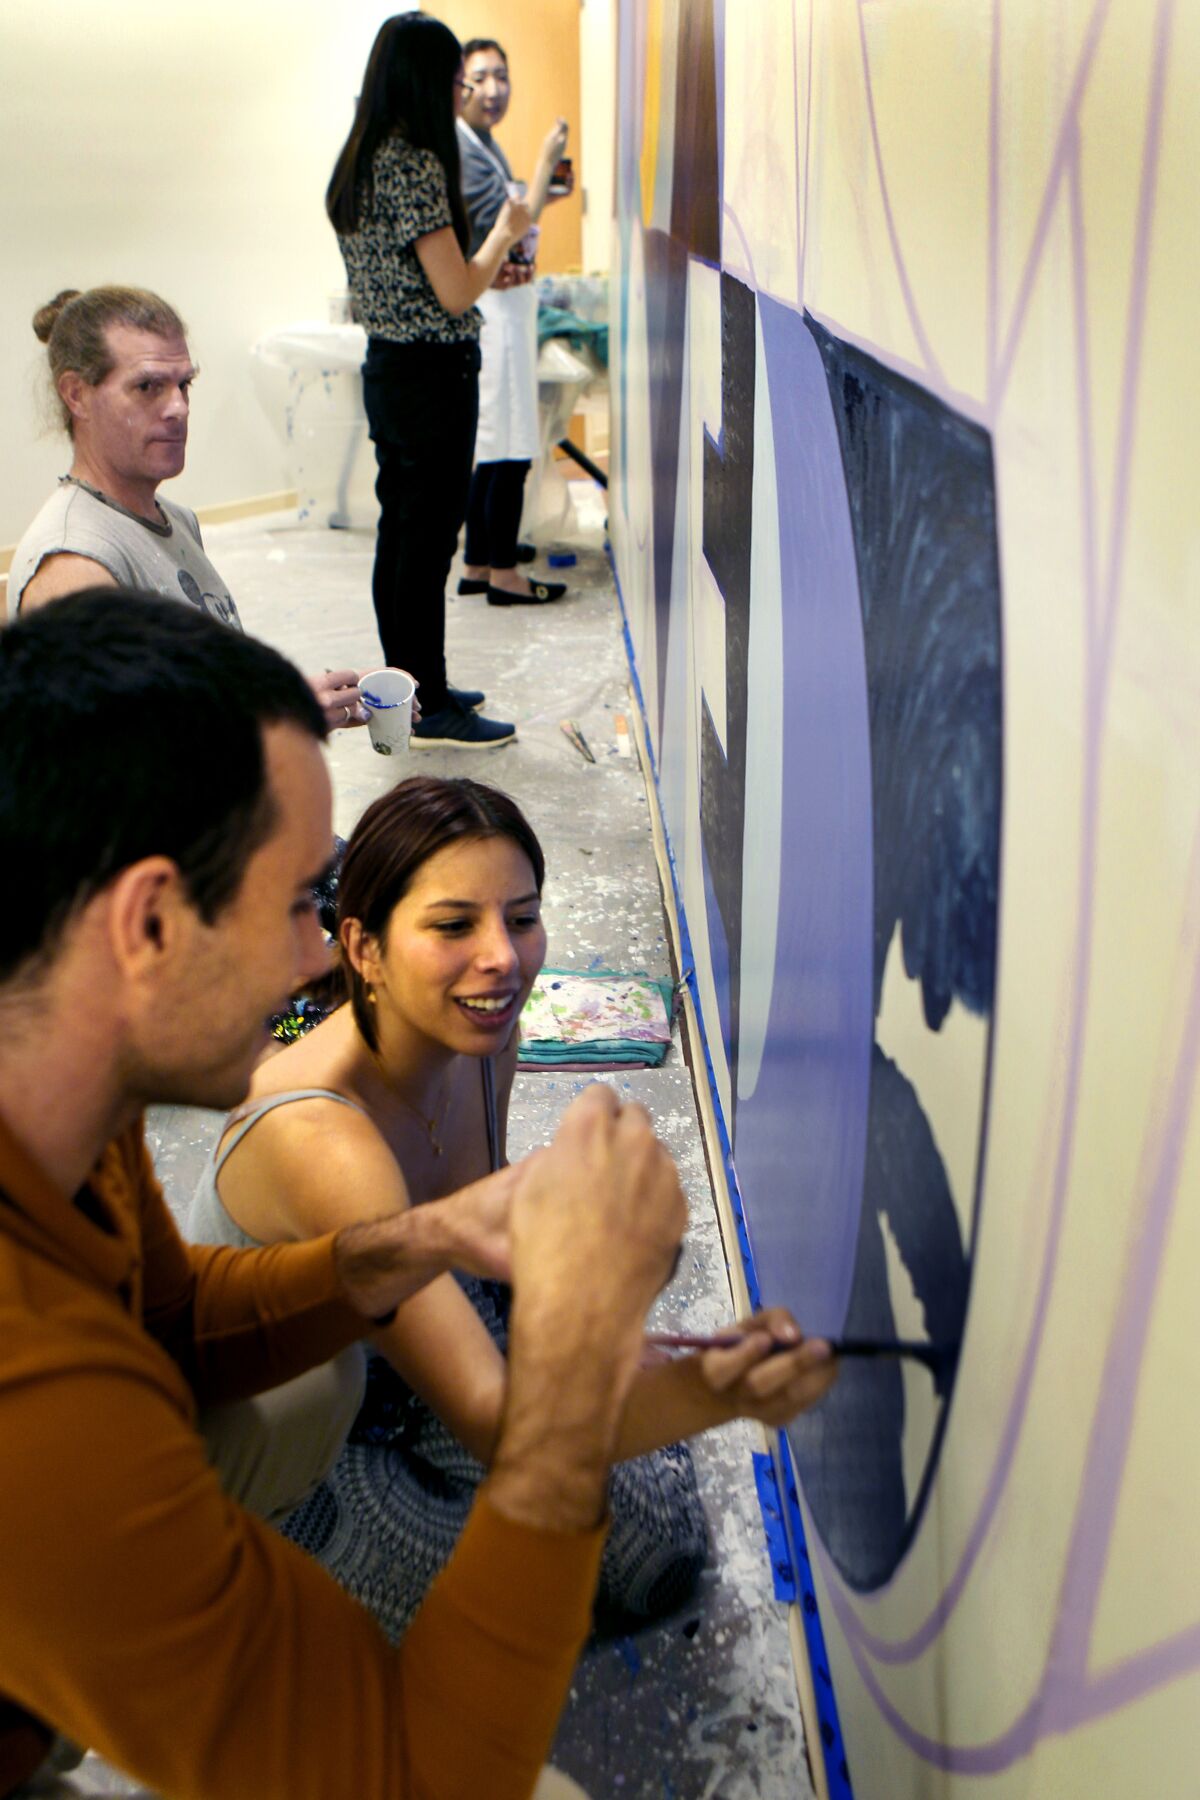 Artist Alex Cook supervises as Ph.D. student Benji Kaveladze, foreground, and undergrad Jaclyn Gonzalez help paint Cook's "You Are Loved" mural in the Social Ecology I building at UC Irvine. The mural is part of the School of Social Ecology's Compassion Action Project.